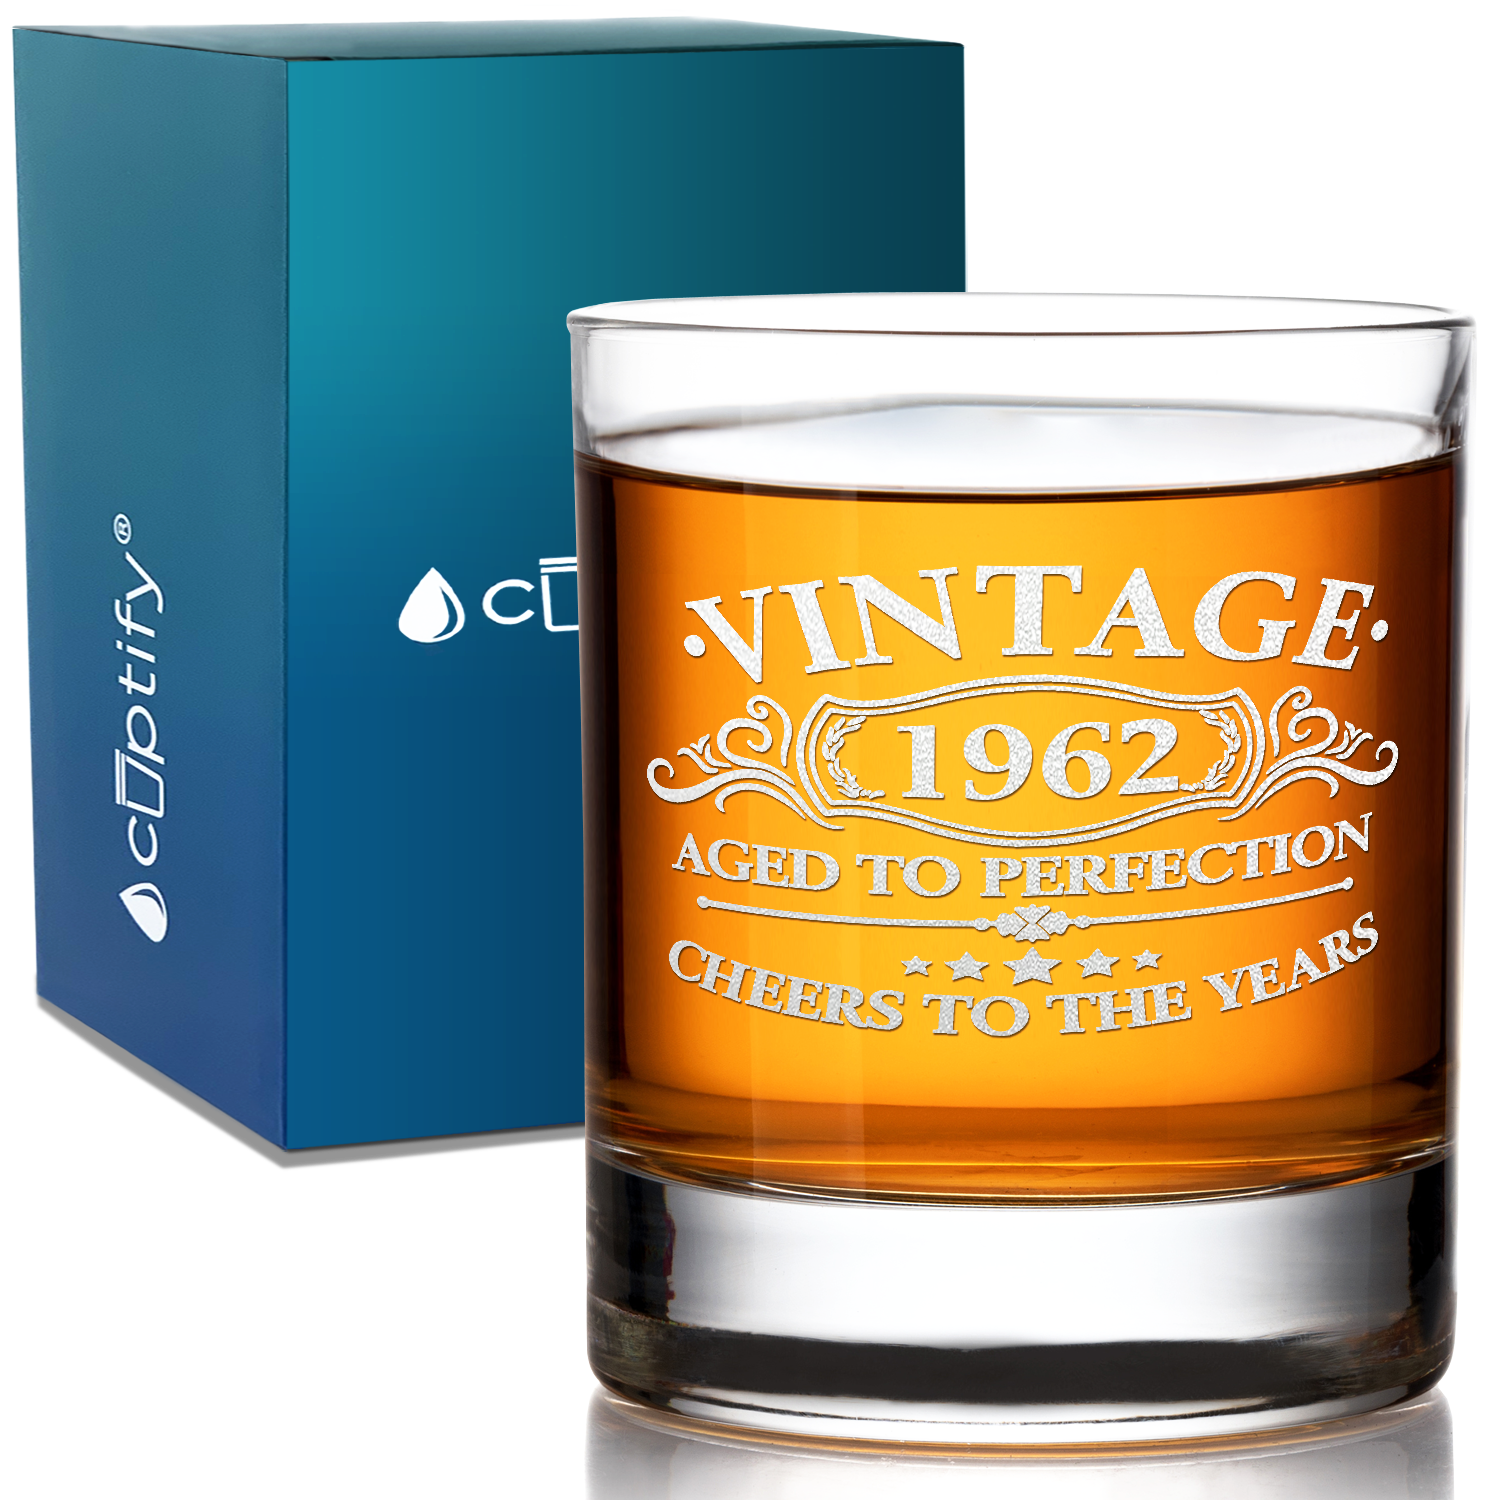 Vintage Aged To Perfection Cheers To 59 Years 1962 Laser Engraved on 10.25oz Old Fashion Glass